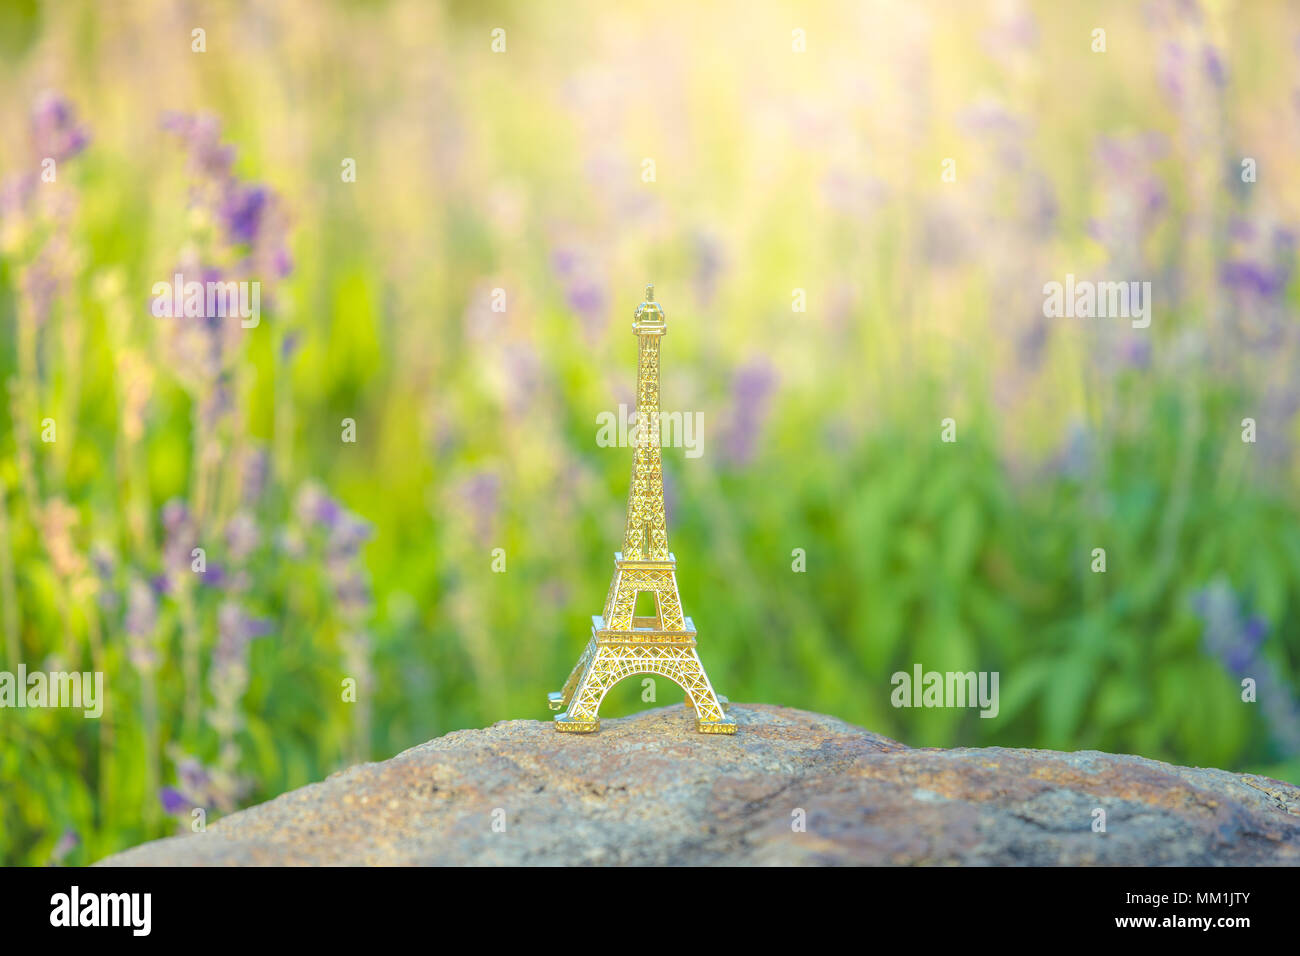 bright image of a miniaturized eiffel tower with lavander fields in background in day . french culture . Stock Photo